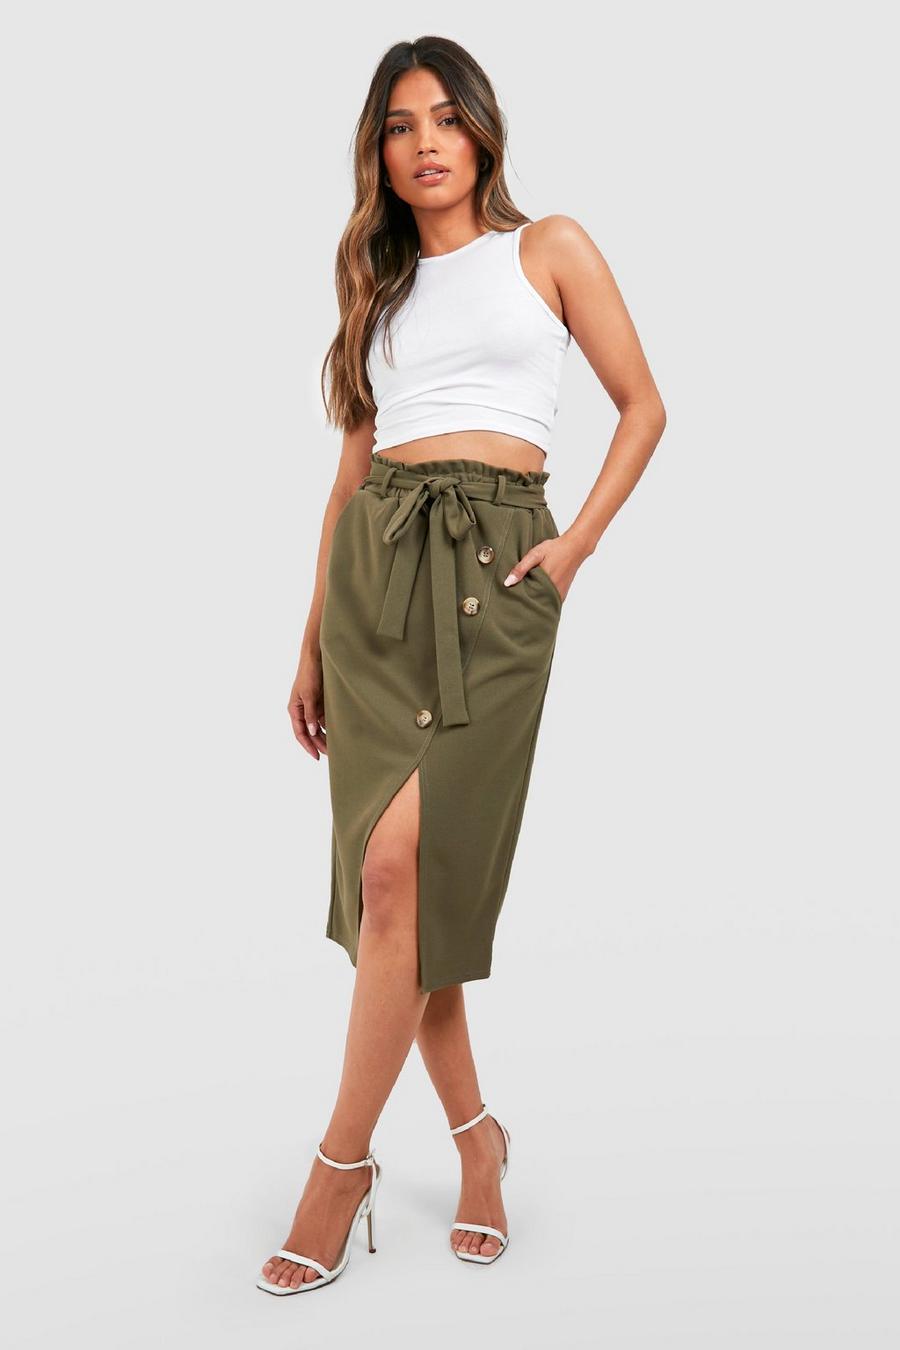 Khaki Belted Button Front Pencil Skirt